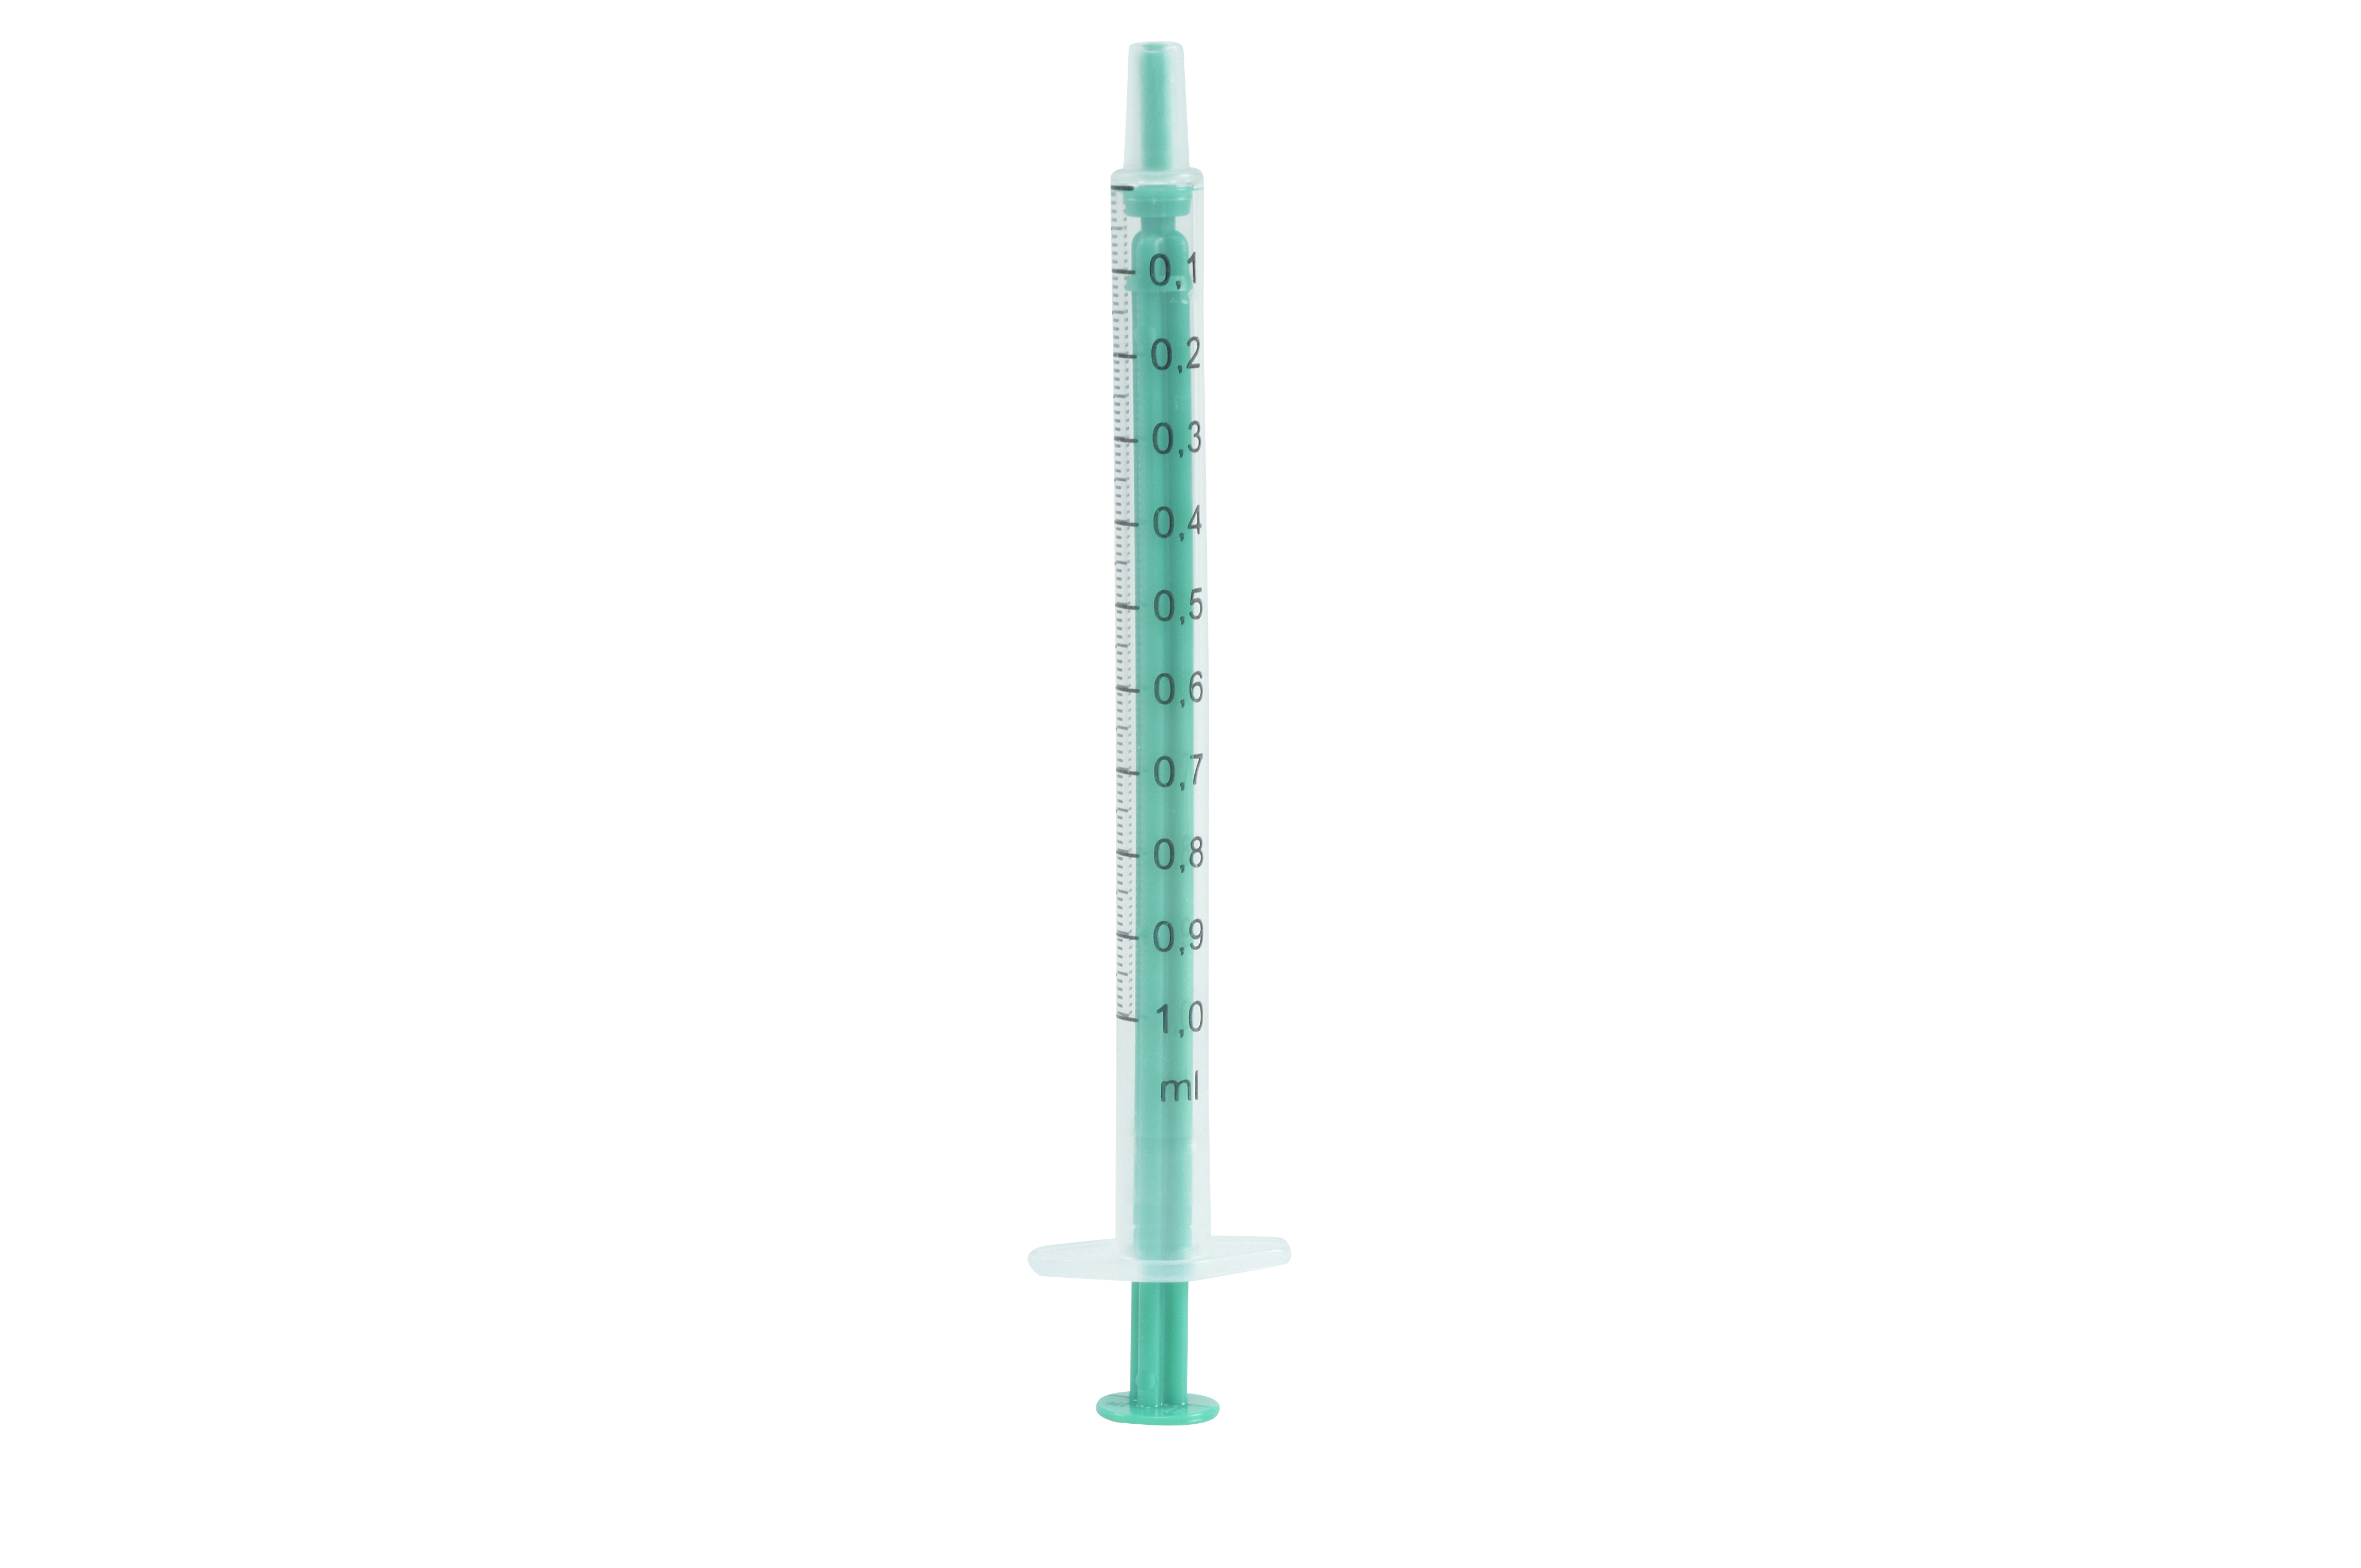 Norm-Ject (HSW HENKE-JECT®) disposable syringe2-component, 1 ml, luer, 100 pcs